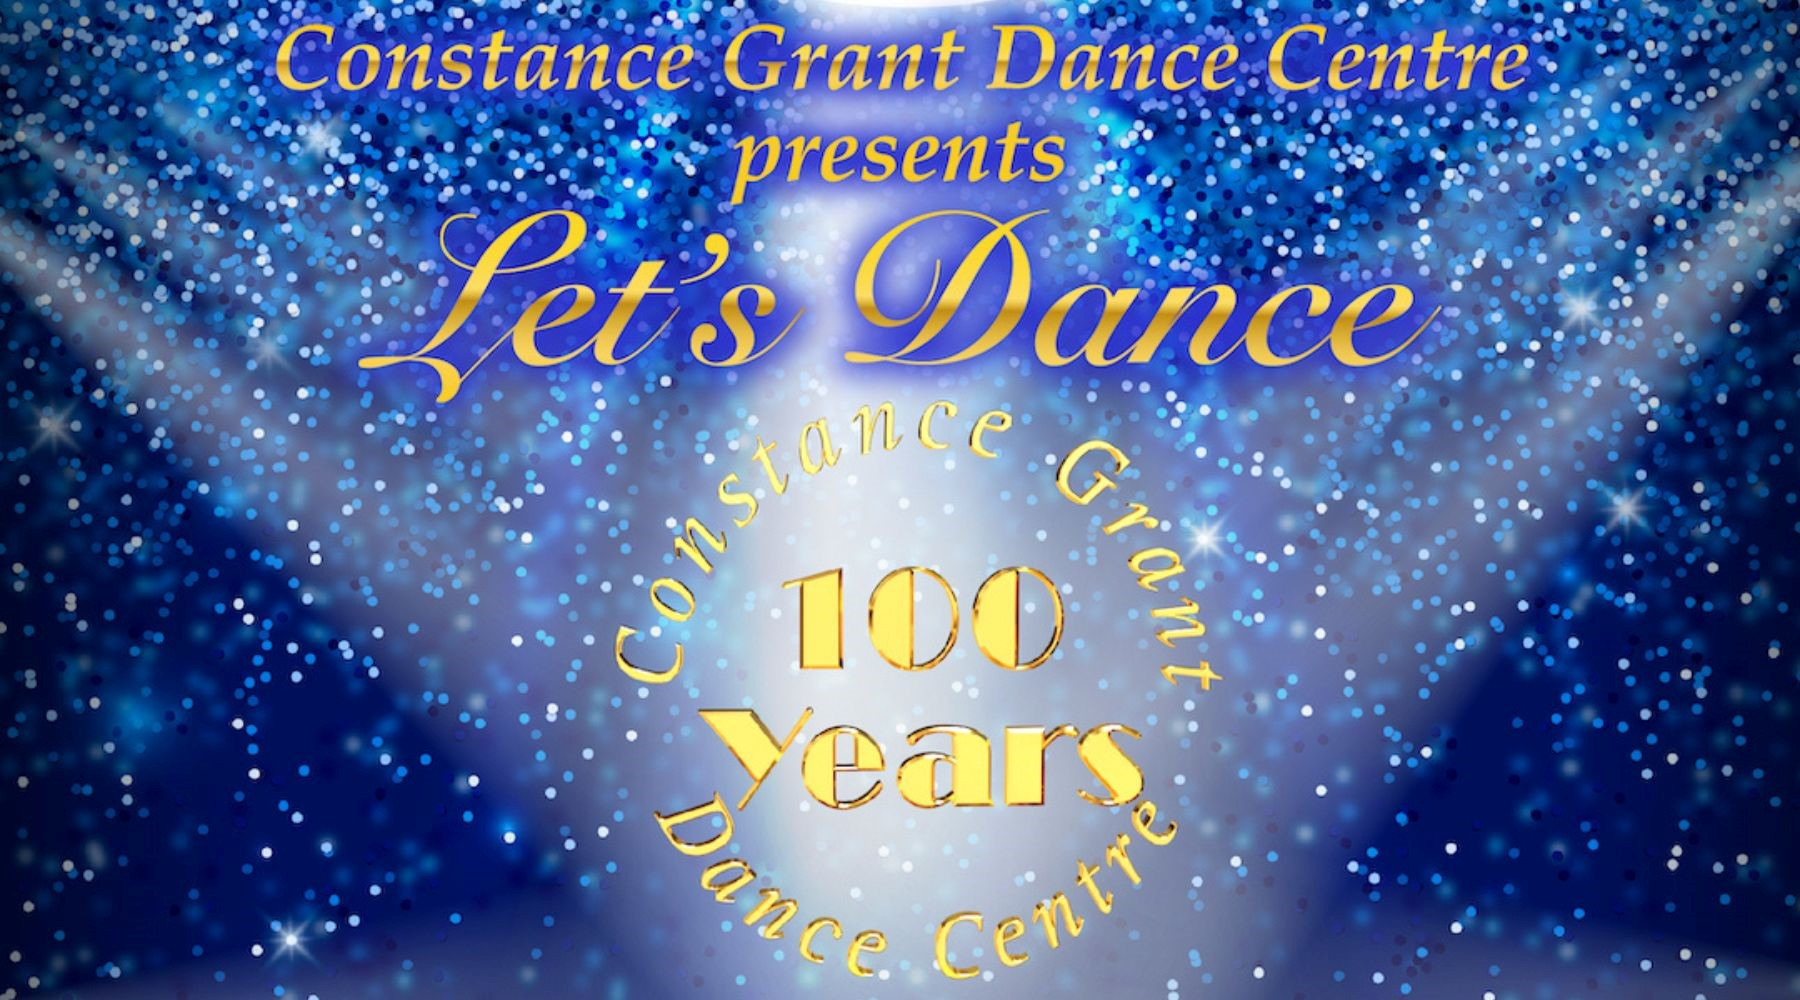 Image name Lets Dance 100 Years of CGDC at Sheffield City Hall Oval Hall Sheffield 1 the 4 image from the post Let's Dance - 100 Years of CGDC at Sheffield City Hall Oval Hall, Sheffield in Yorkshire.com.